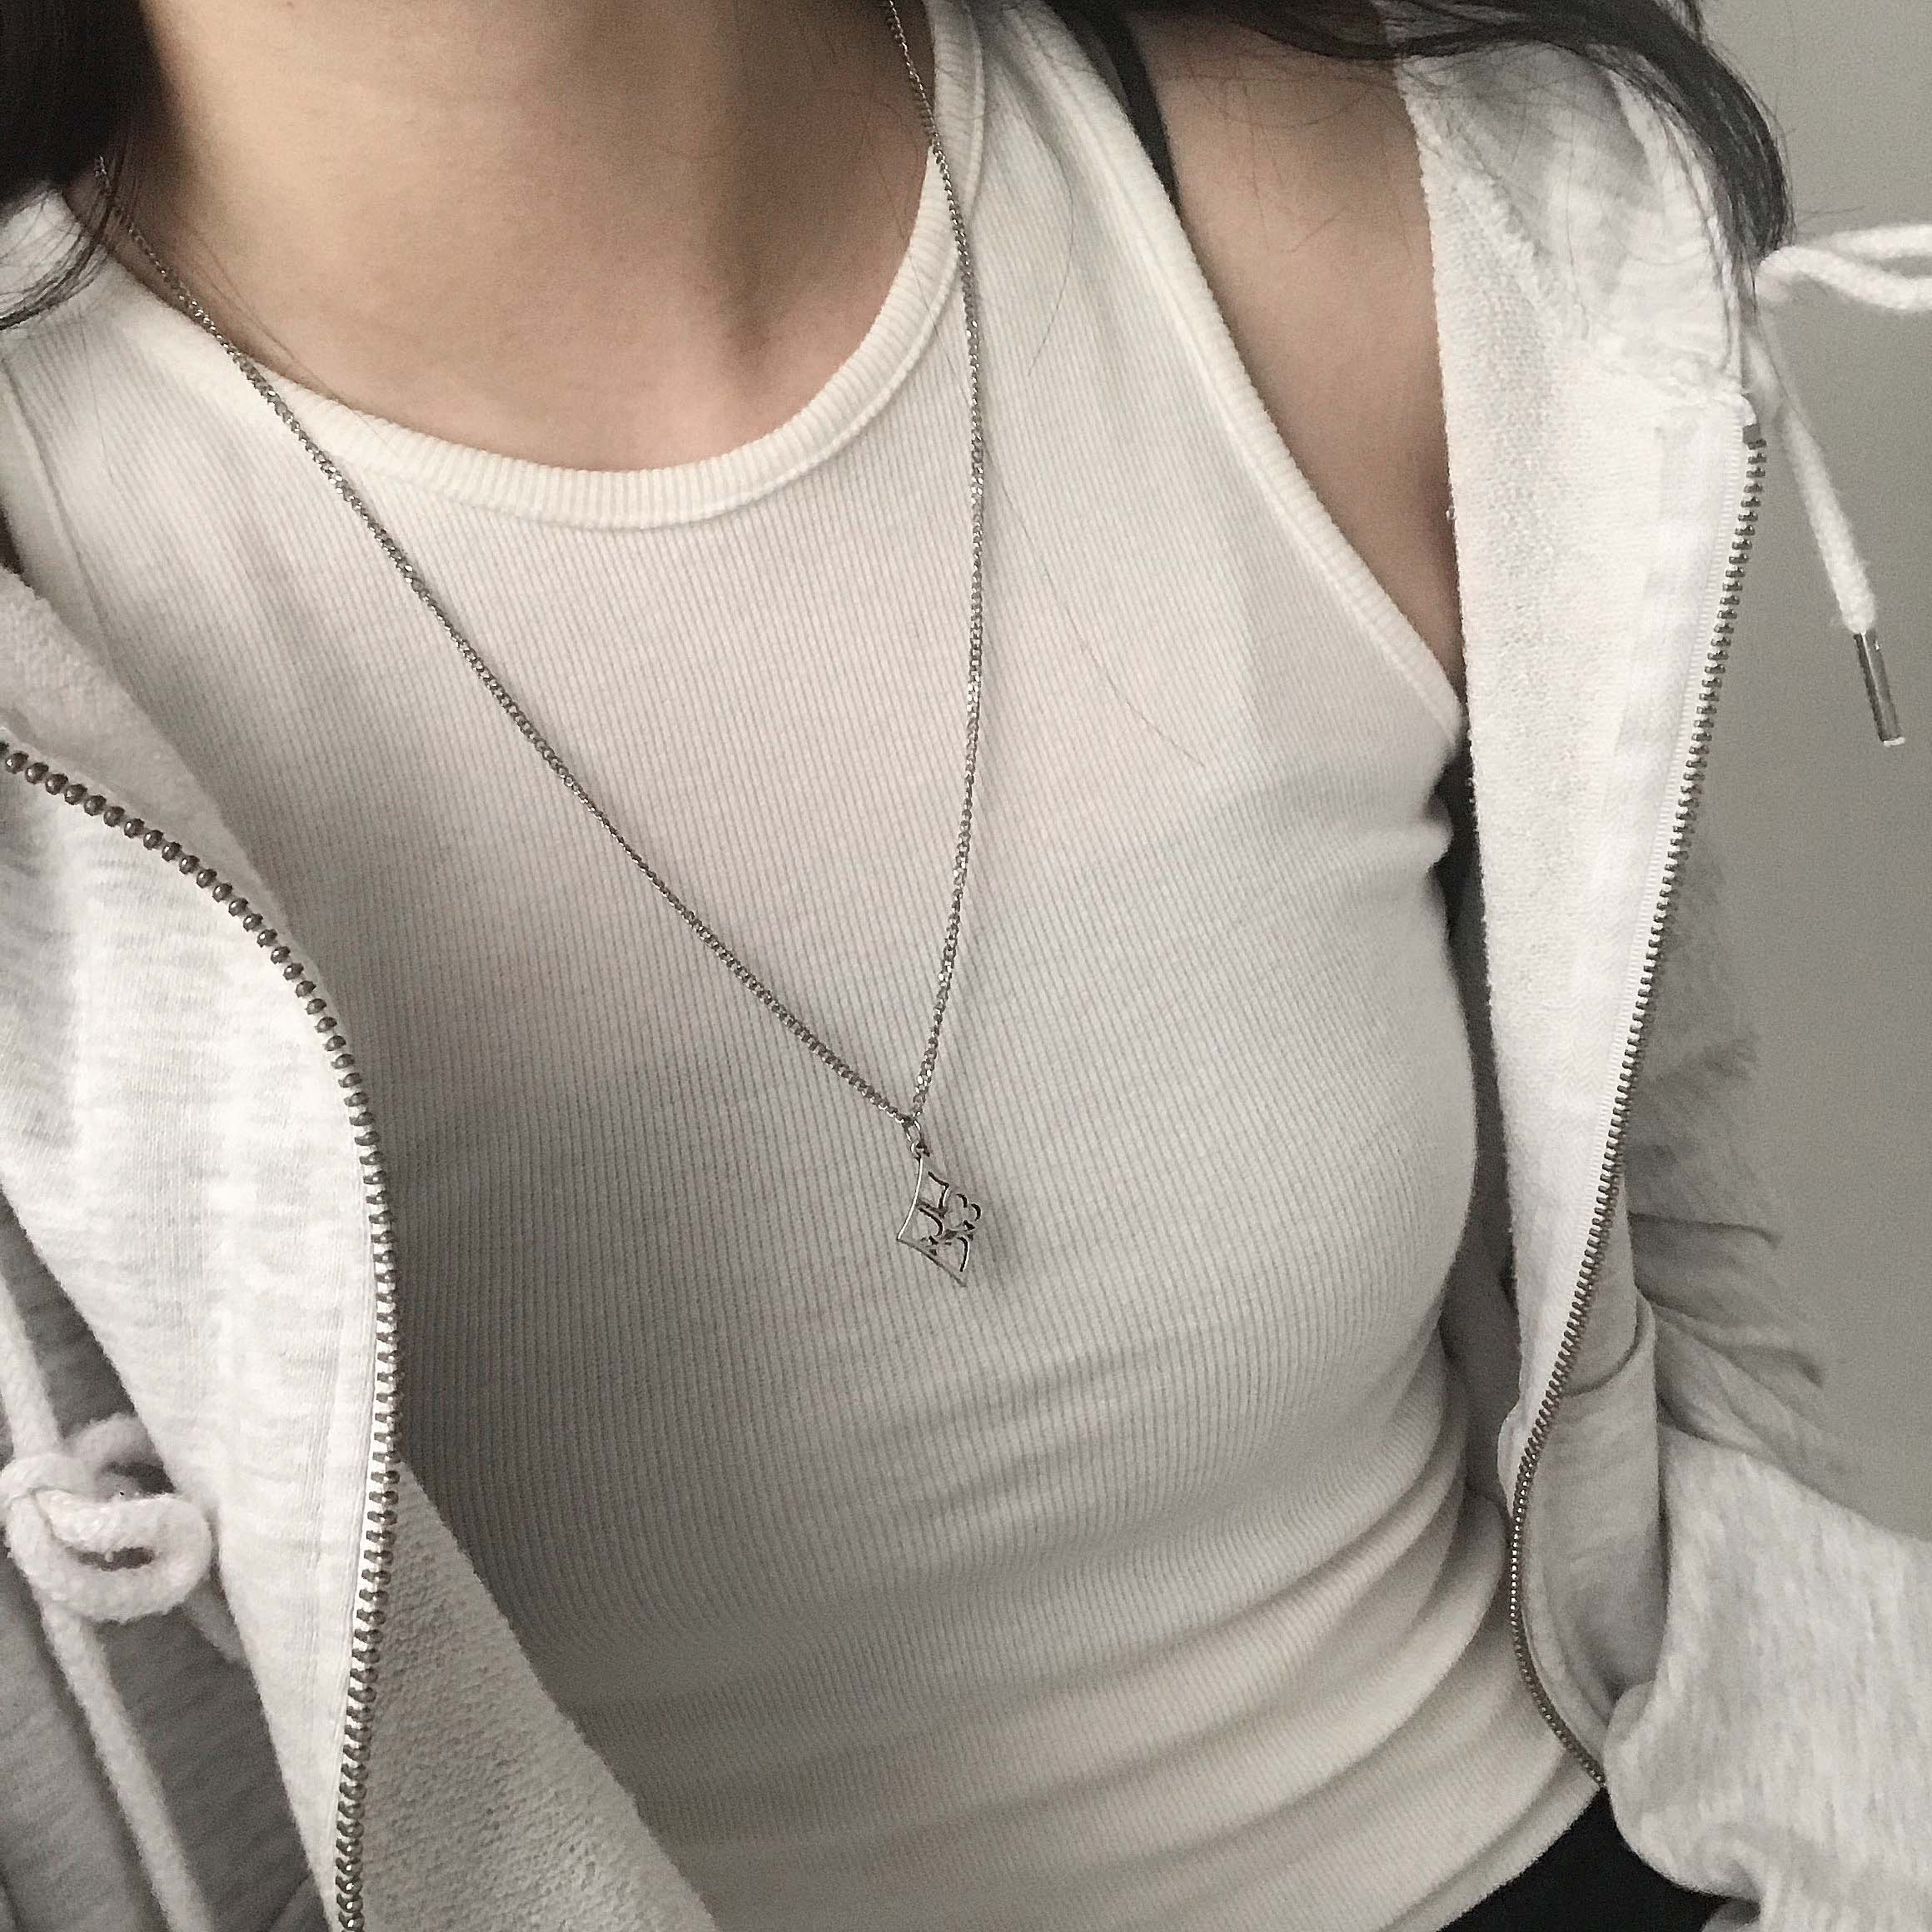 card necklace